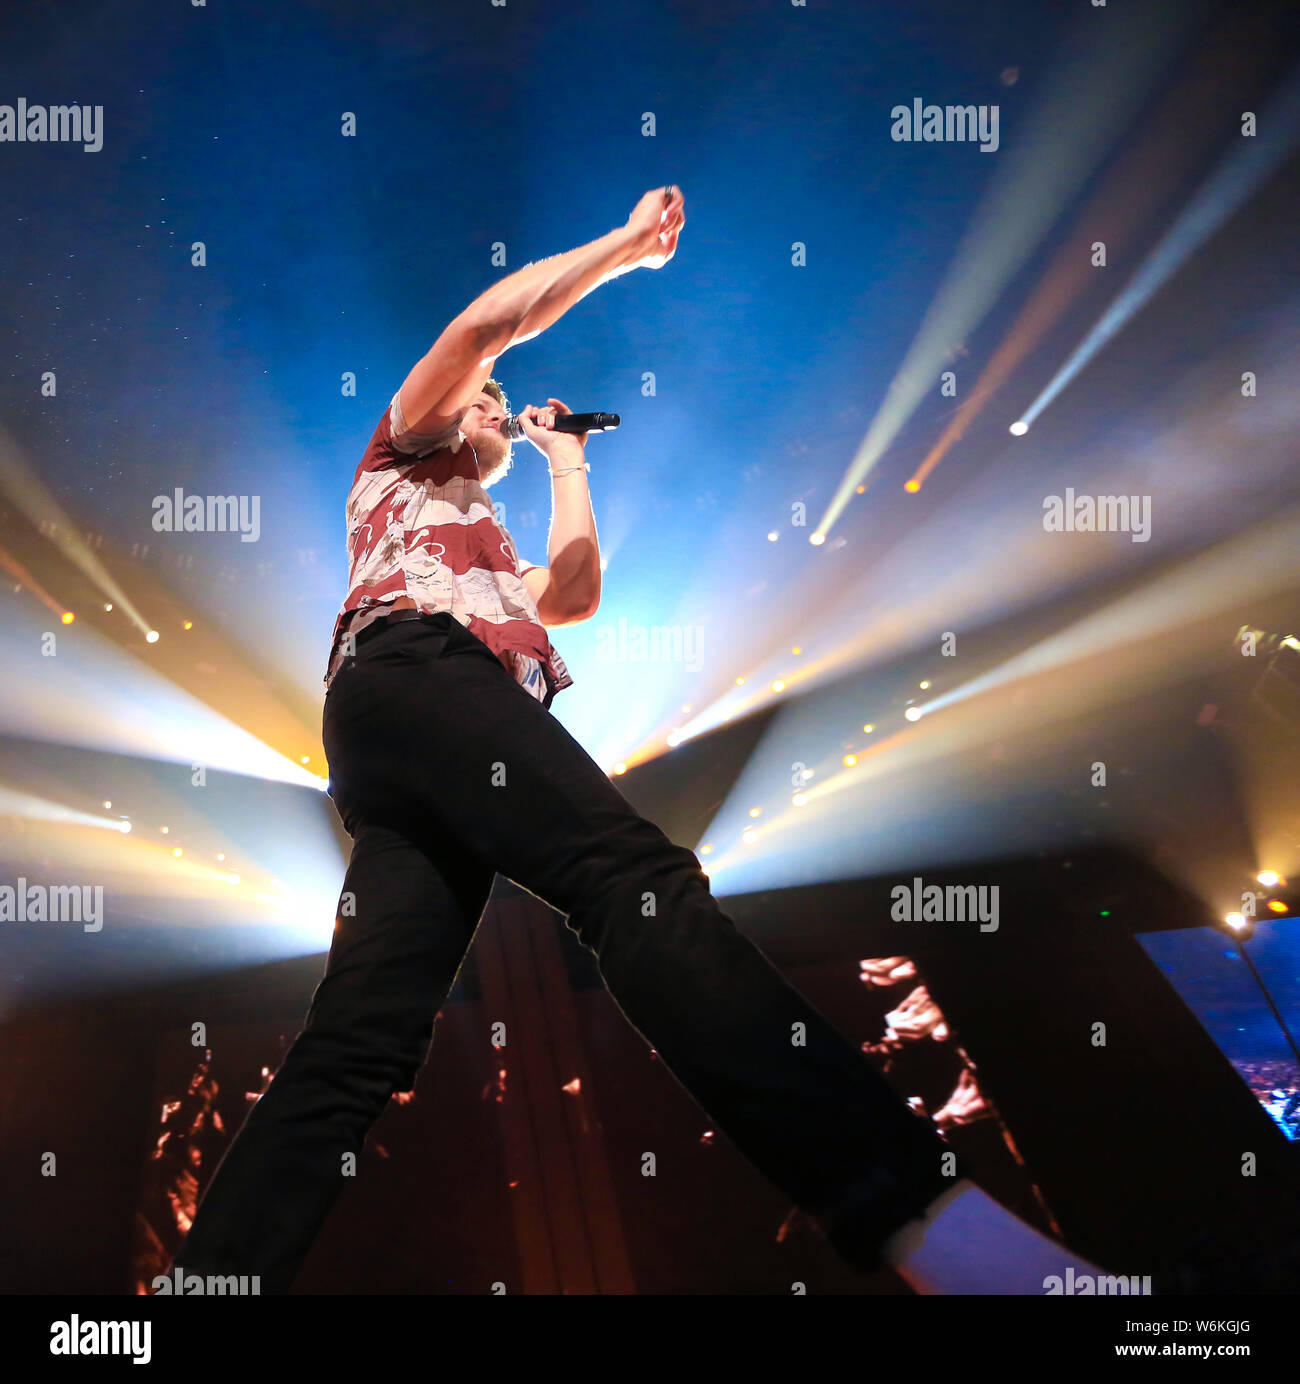 American singer-songwriter Daniel Coulter Reynolds (Dan Reynolds), the lead vocalist of American rock band Imagine Dragons, performs during the band's Stock Photo